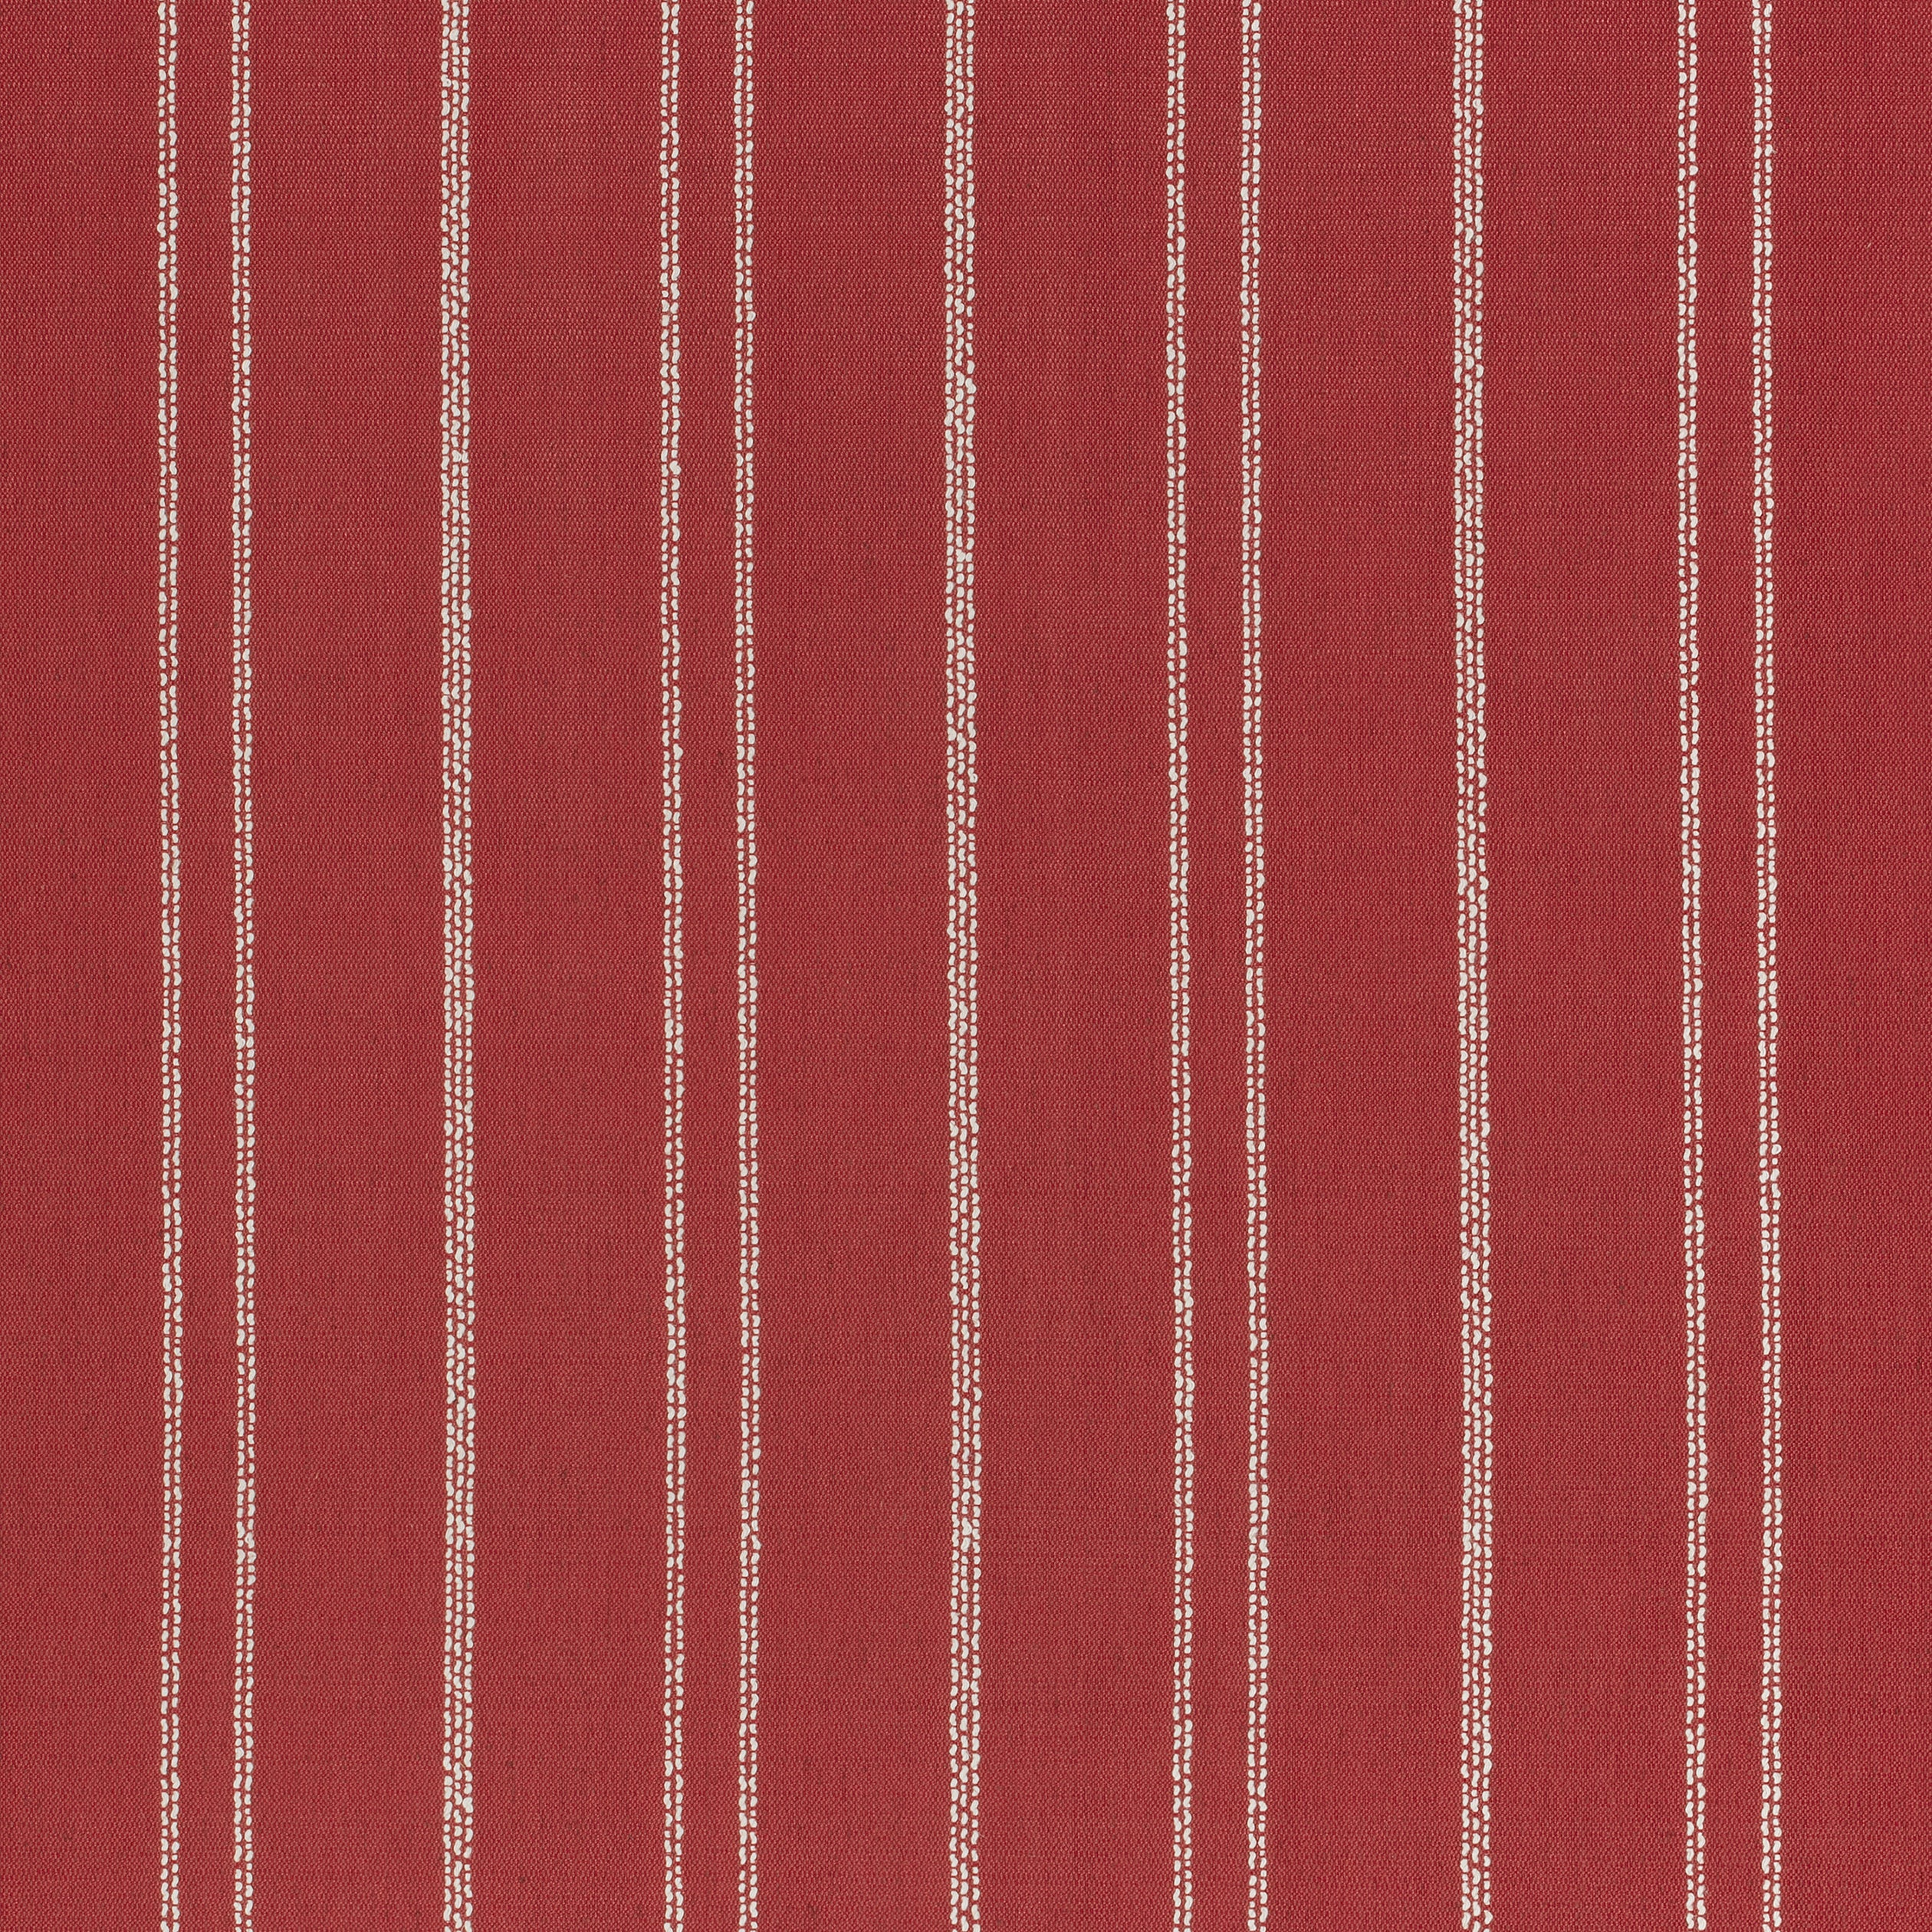 Nolan Stripe fabric in red color - pattern number W73308 - by Thibaut in the Nomad collection